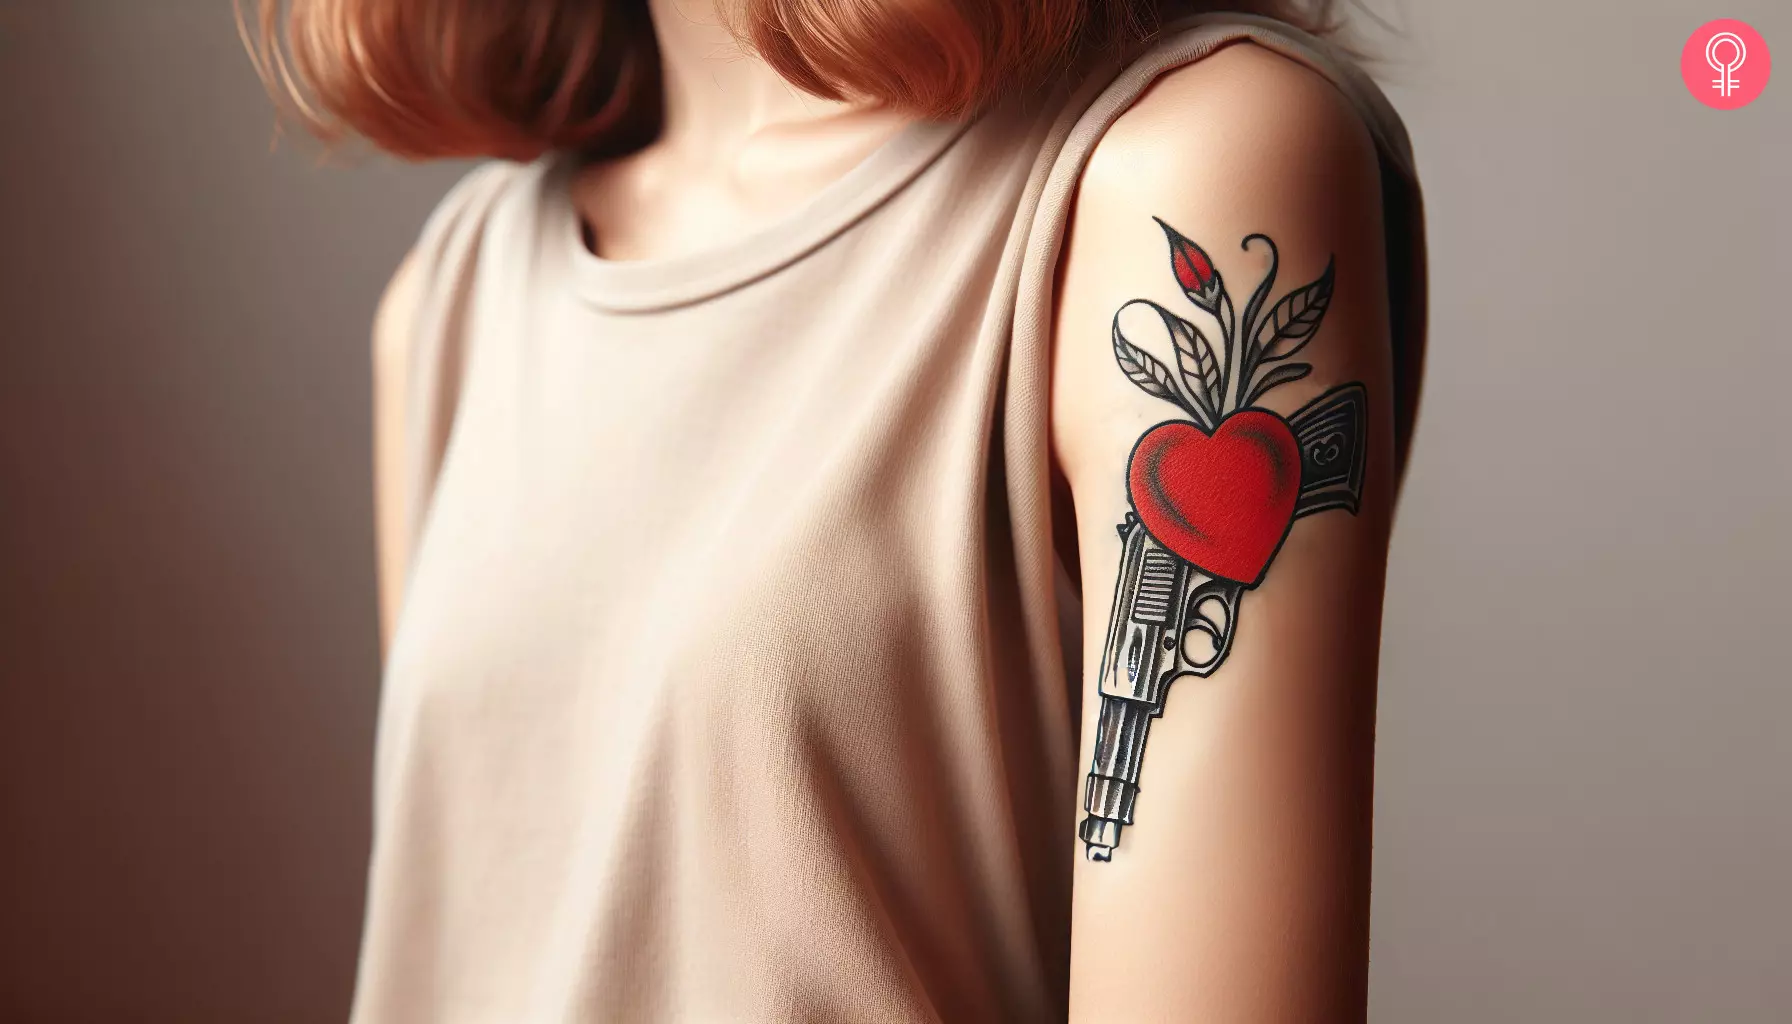 A gun with a heart tattoo on the forearm of a woman